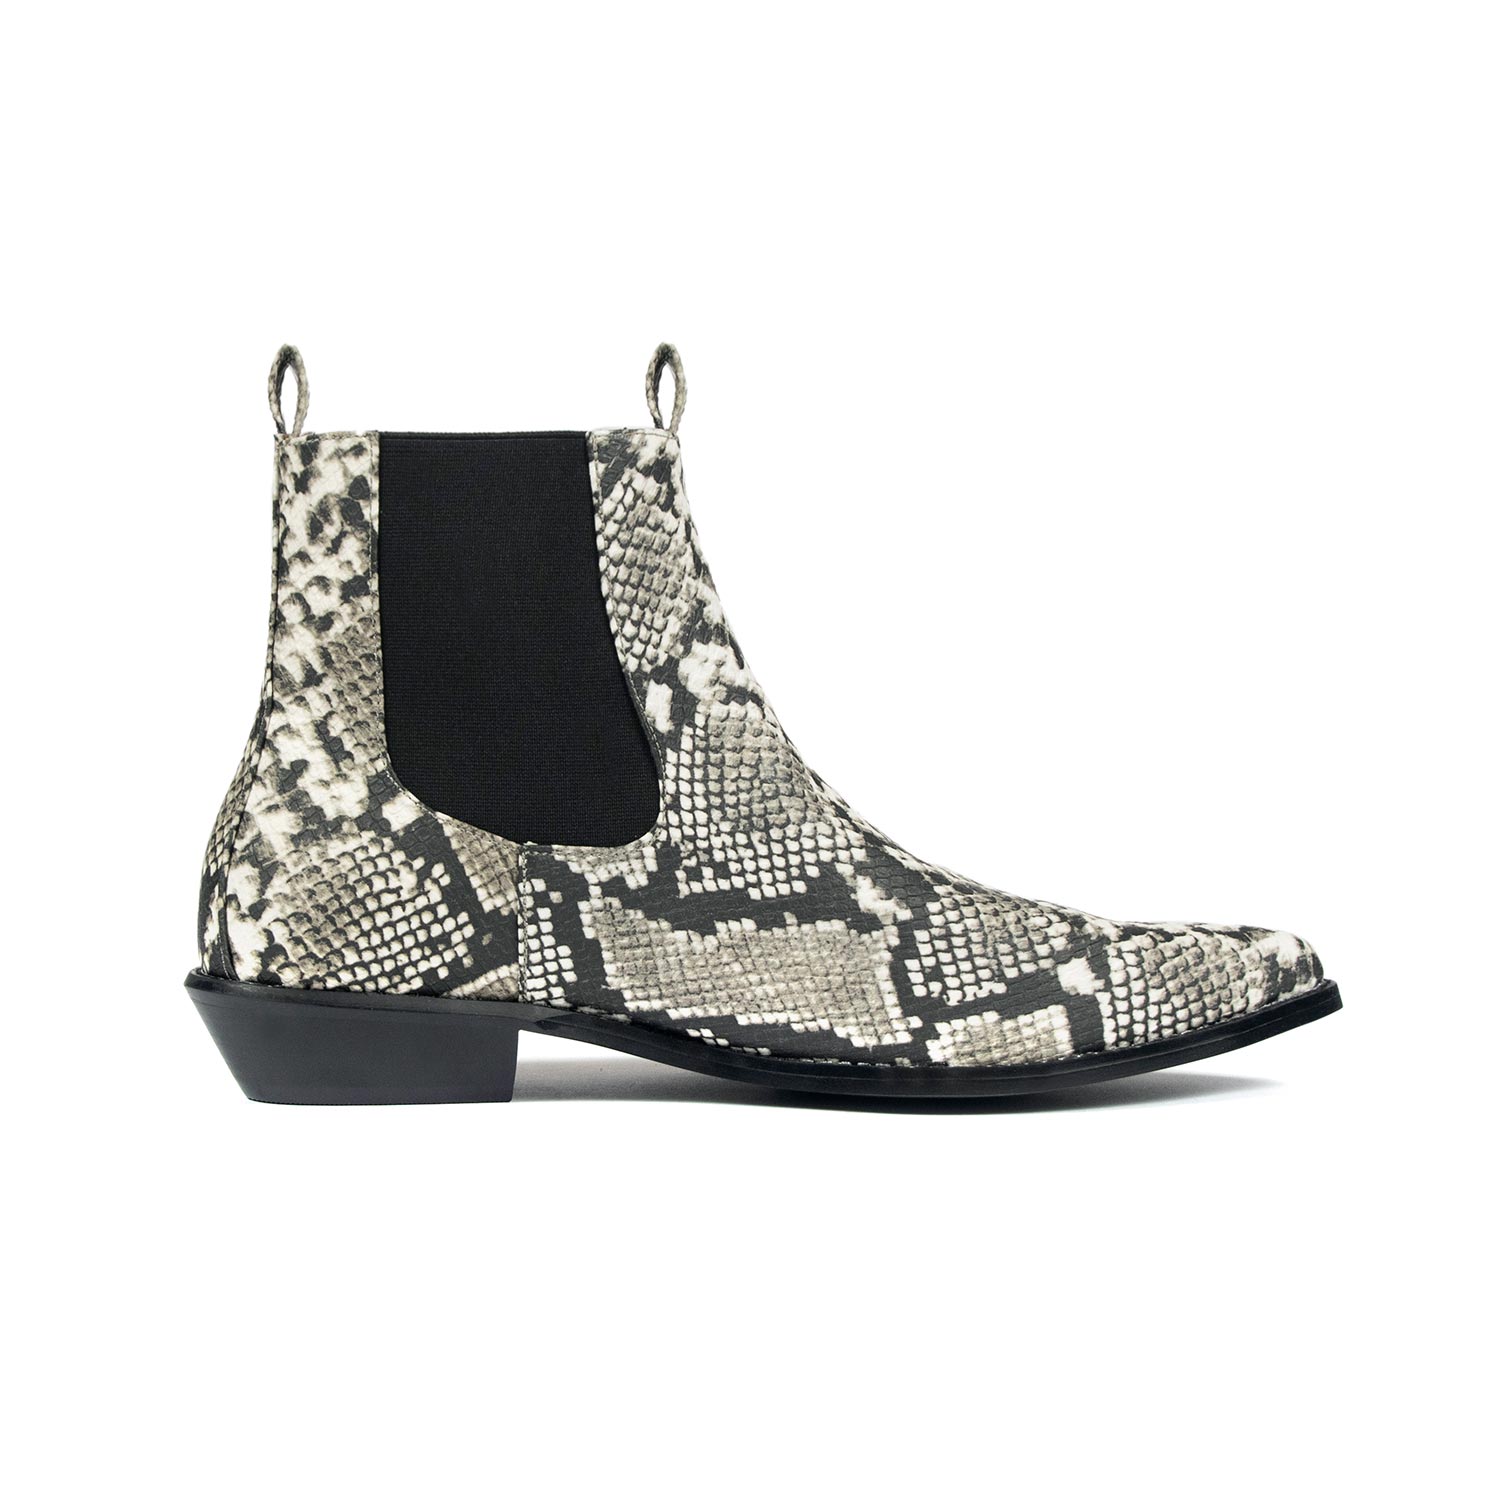 Vegan Addison - Grey Snakeskin Leather Boots | Straight To Apparel